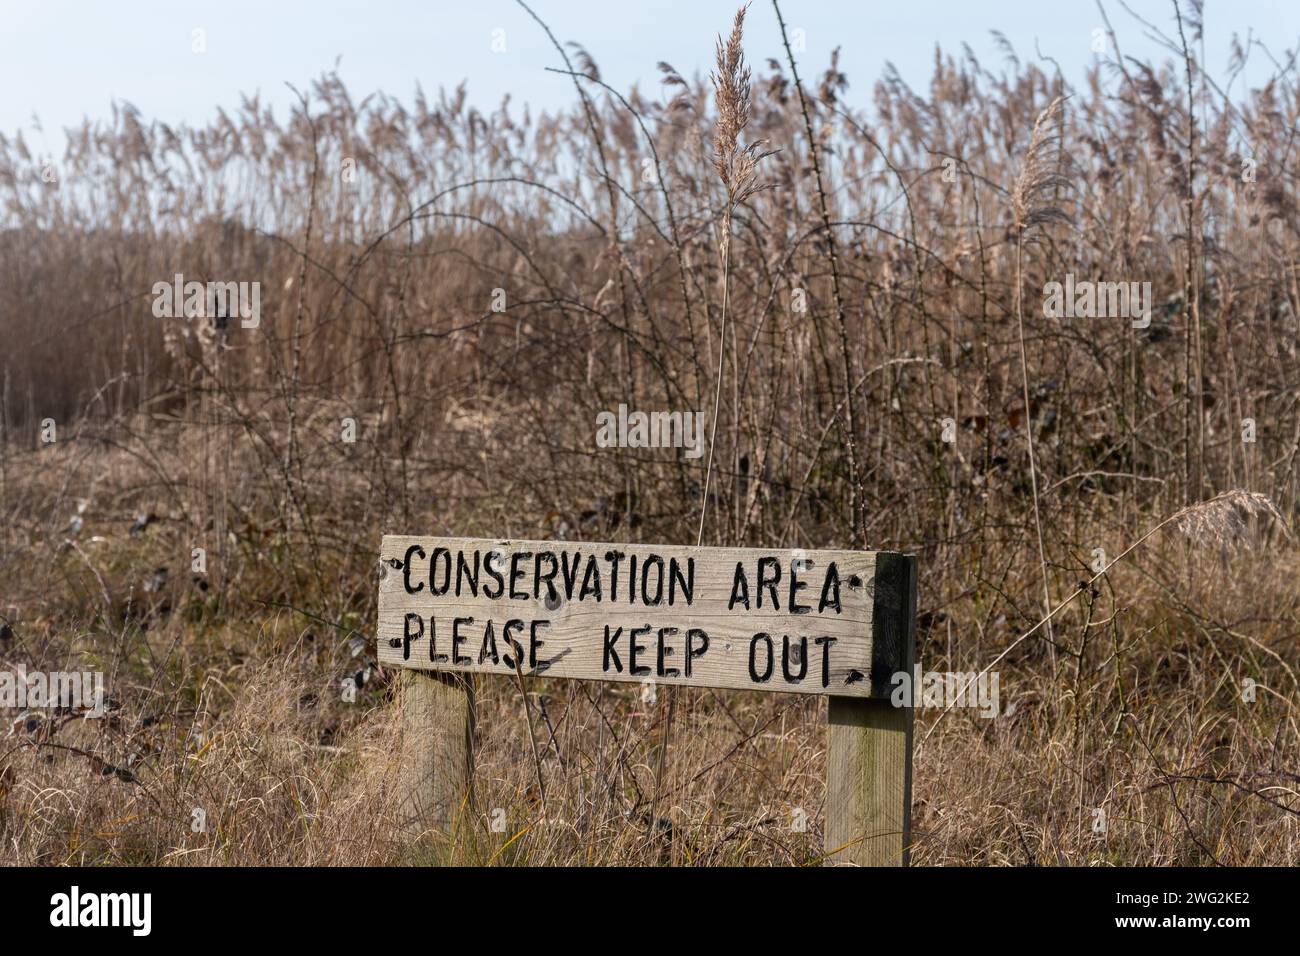 Sign Conservation Area Please Keep Out by reeds in wetland area of nature reserve to prevent disturbance of wildlife by people and dogs, England, UK Stock Photo